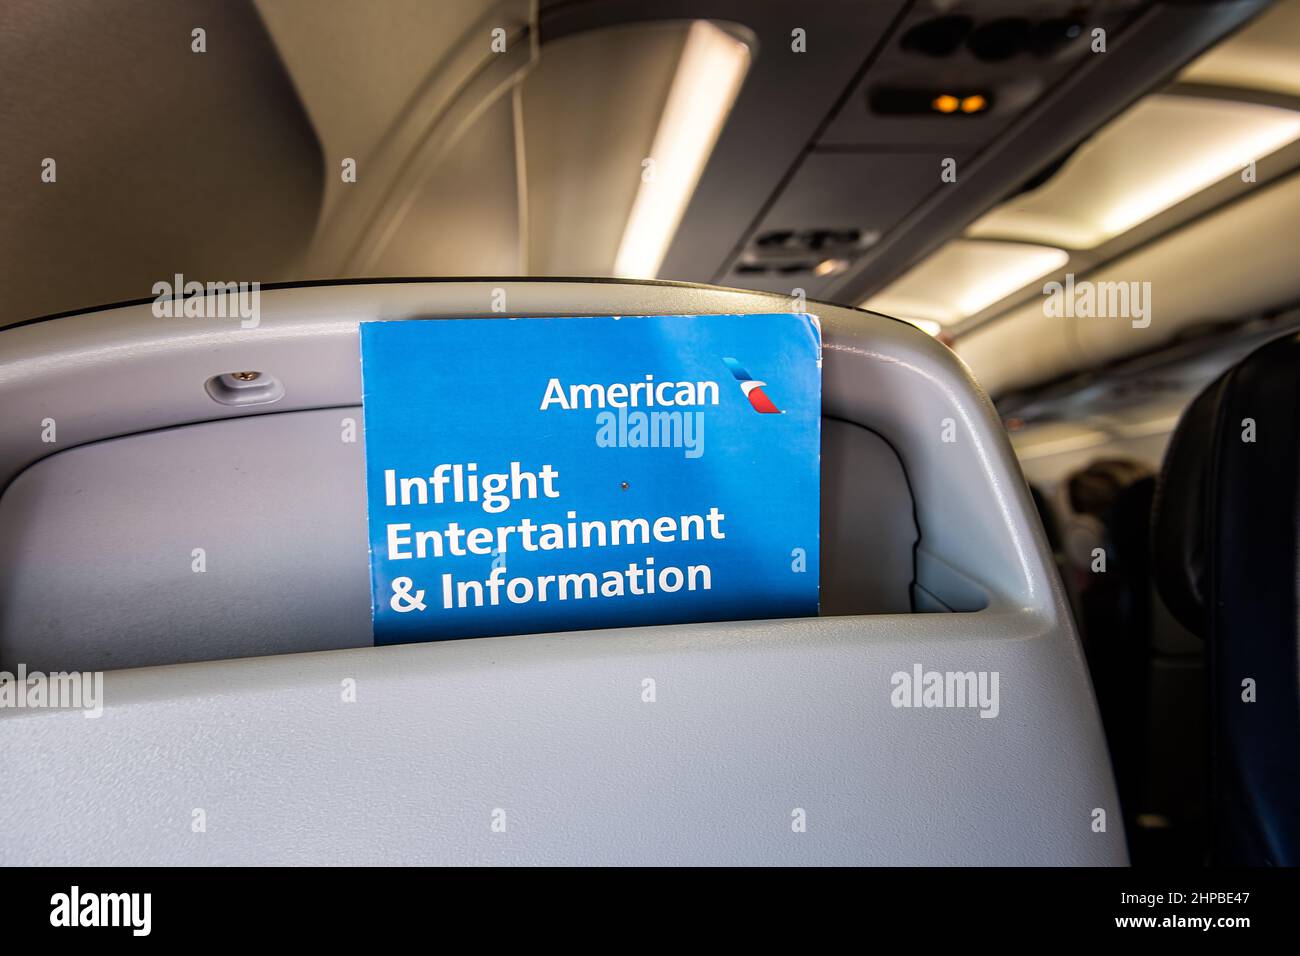 Washington DC, USA - August 25, 2021: Airplane plane seat point of view in American Airlines flight with inflight entertainment information booklet bl Stock Photo